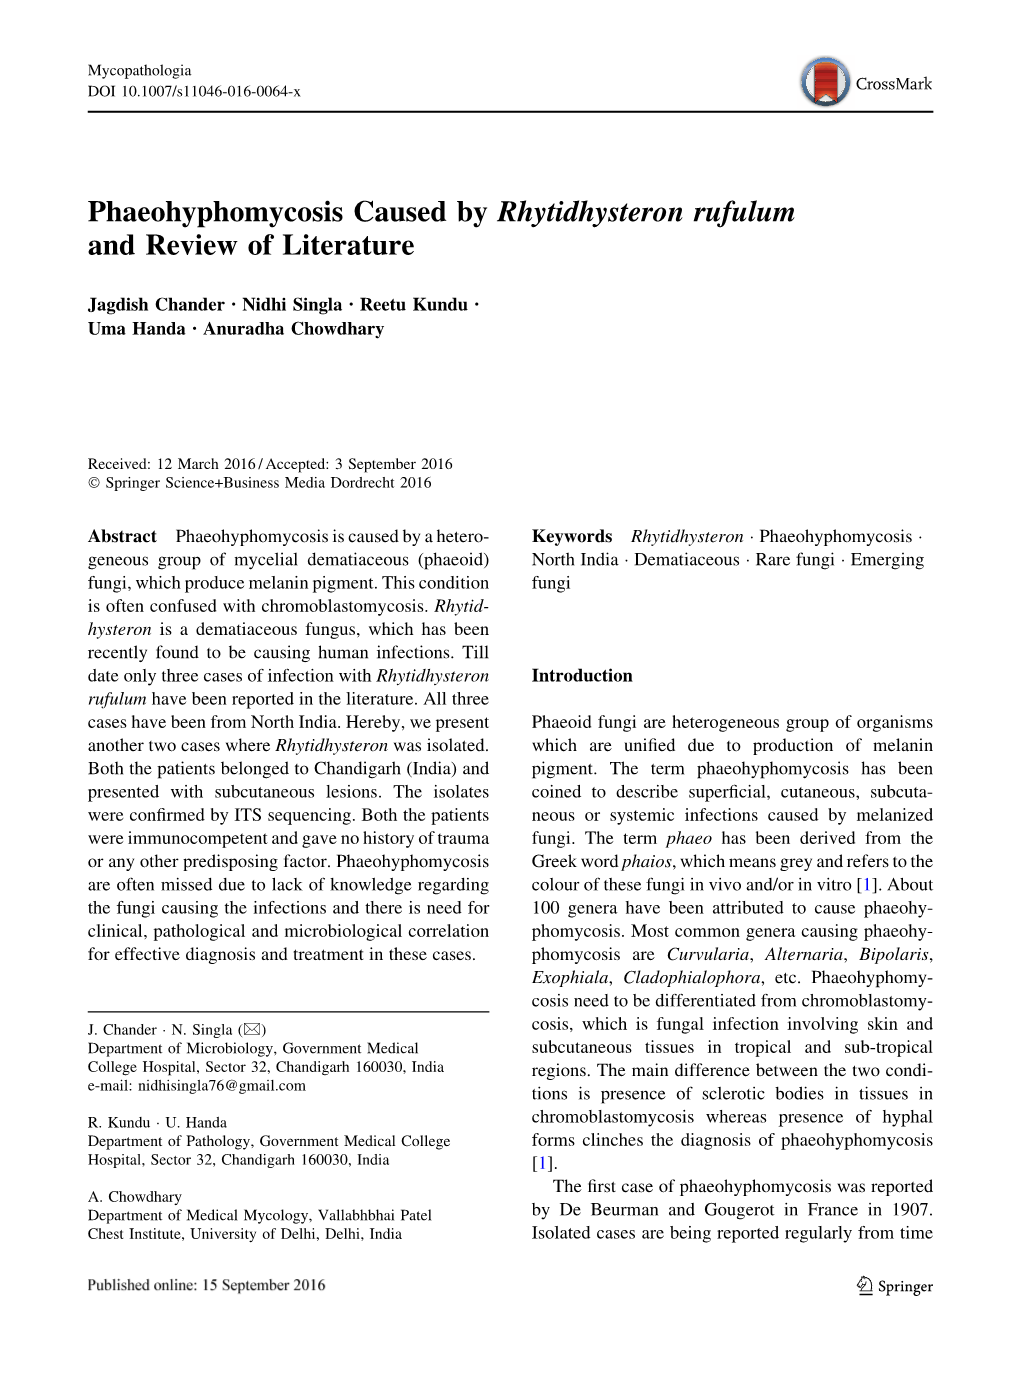 Phaeohyphomycosis Caused by Rhytidhysteron Rufulum and Review of Literature